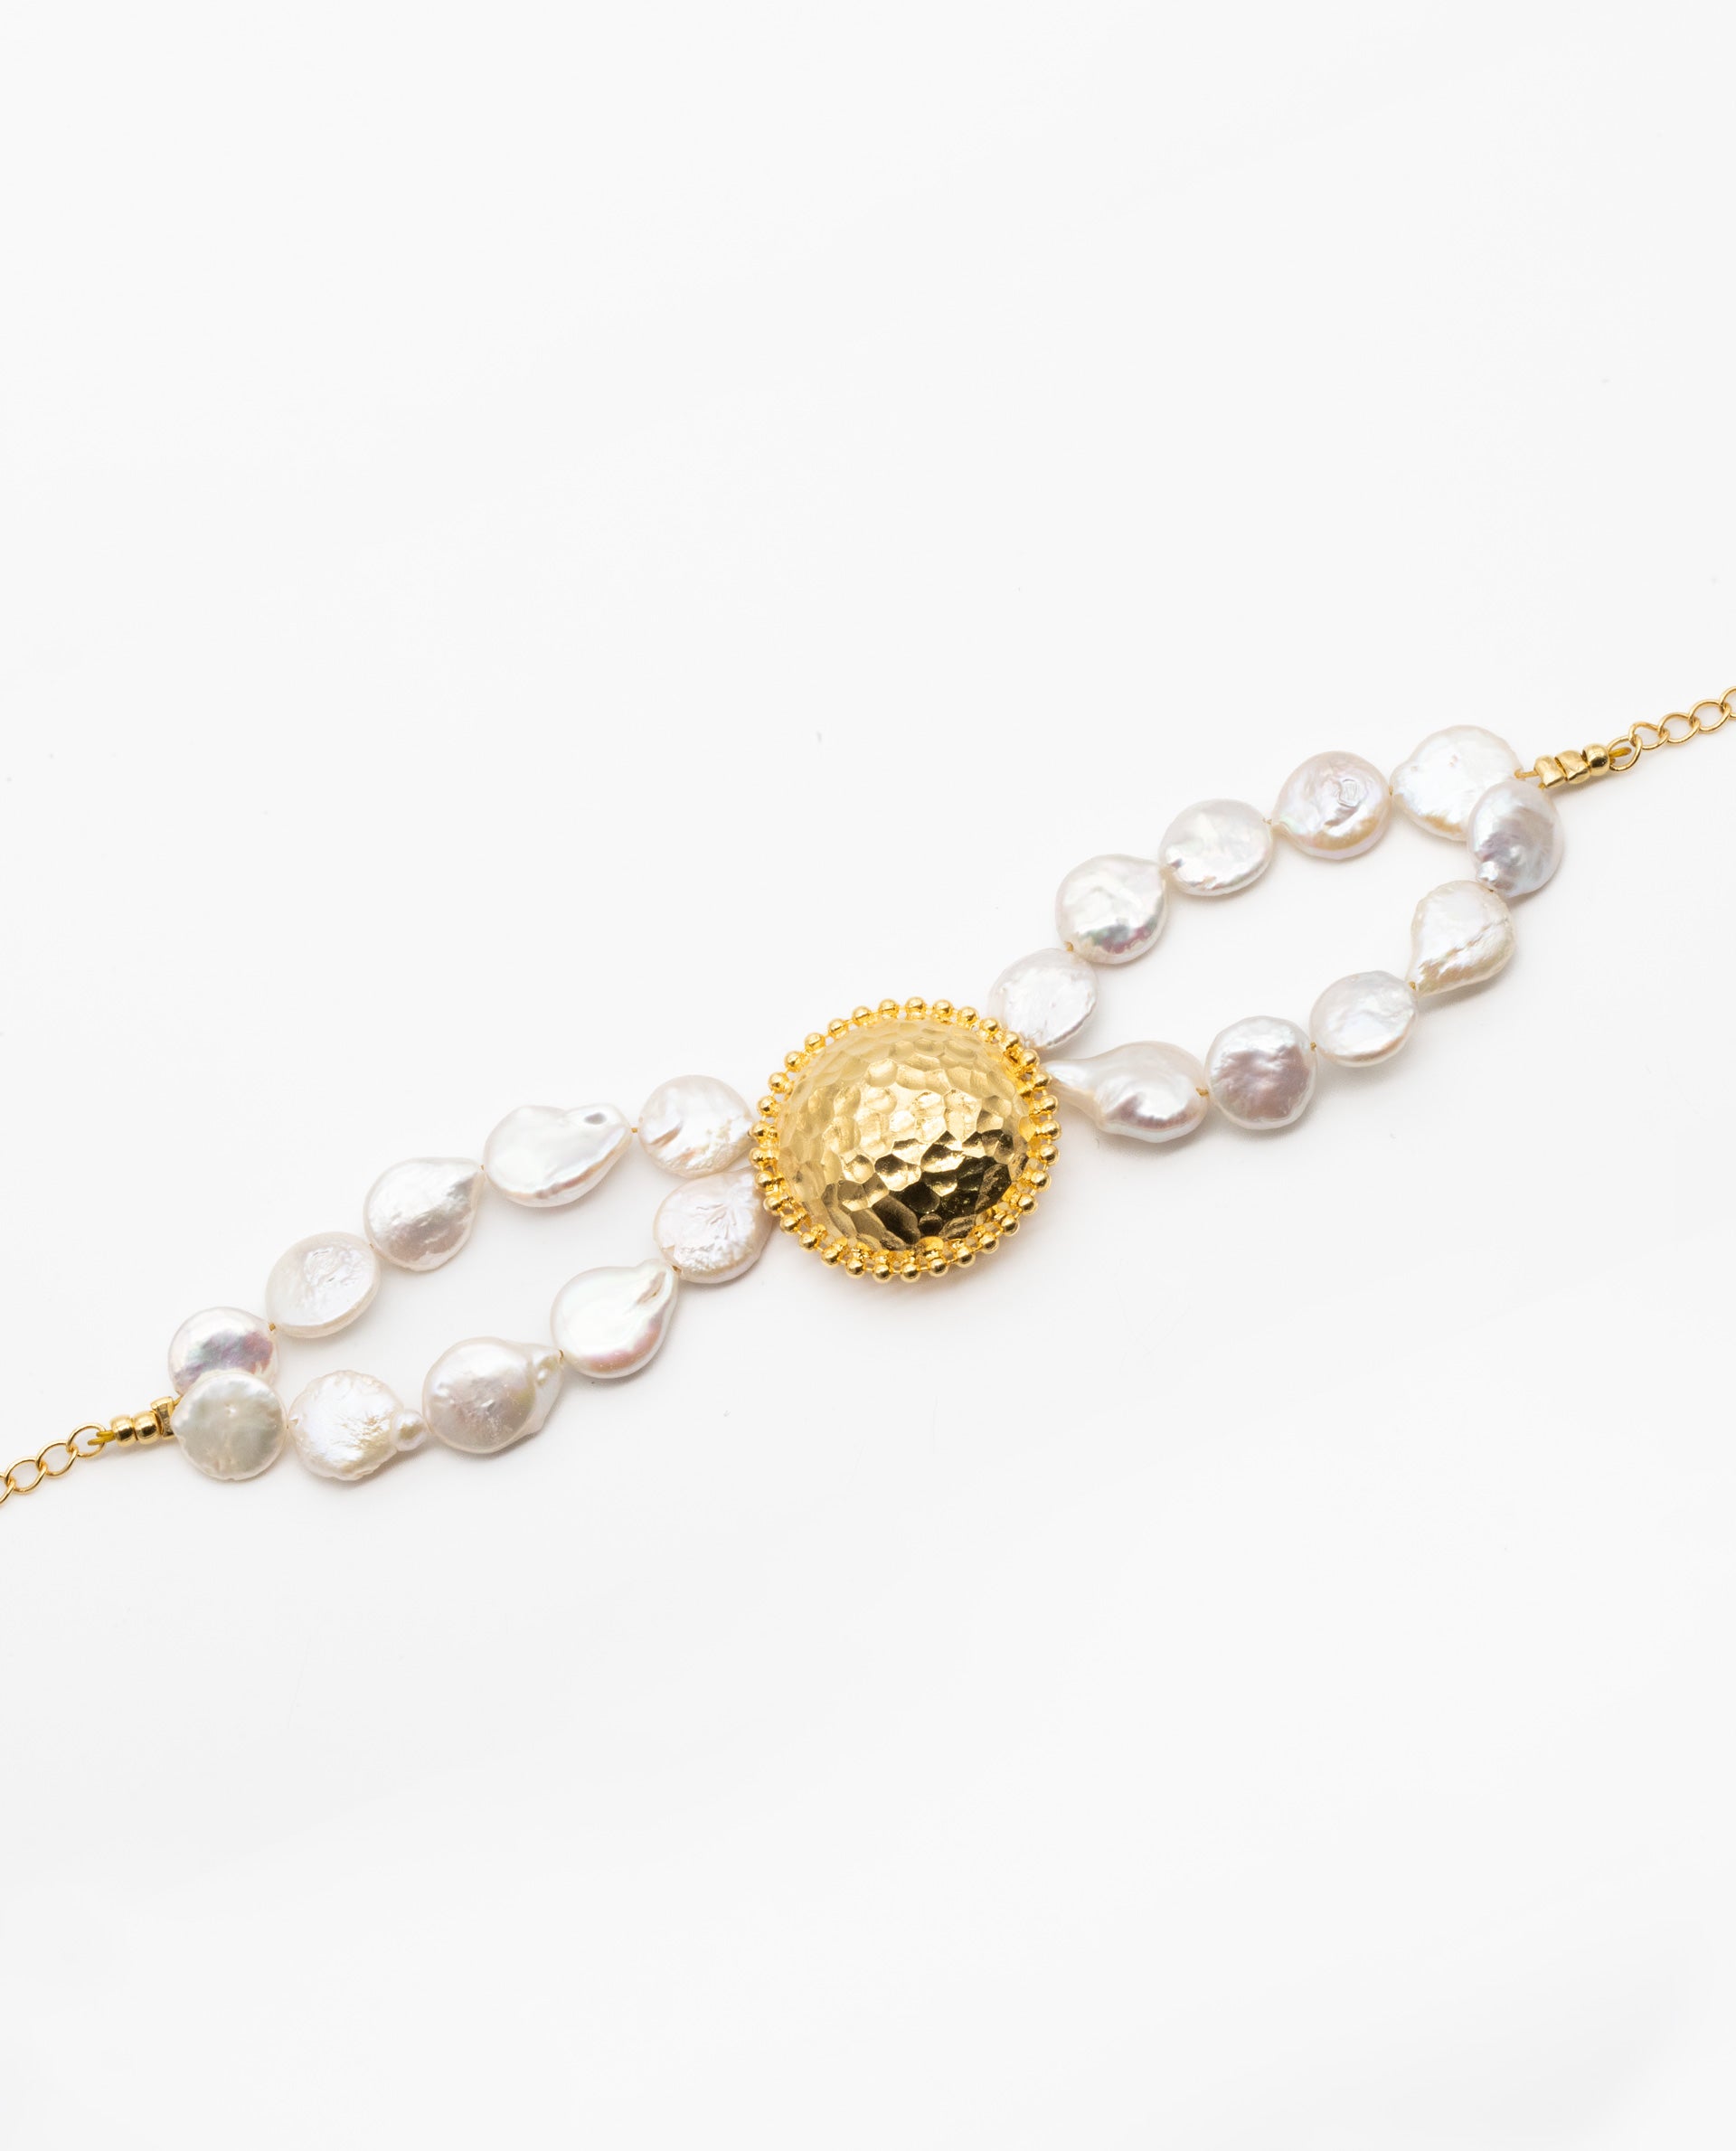 DREAM PEARLS NECKLACE - GOLD PLATED